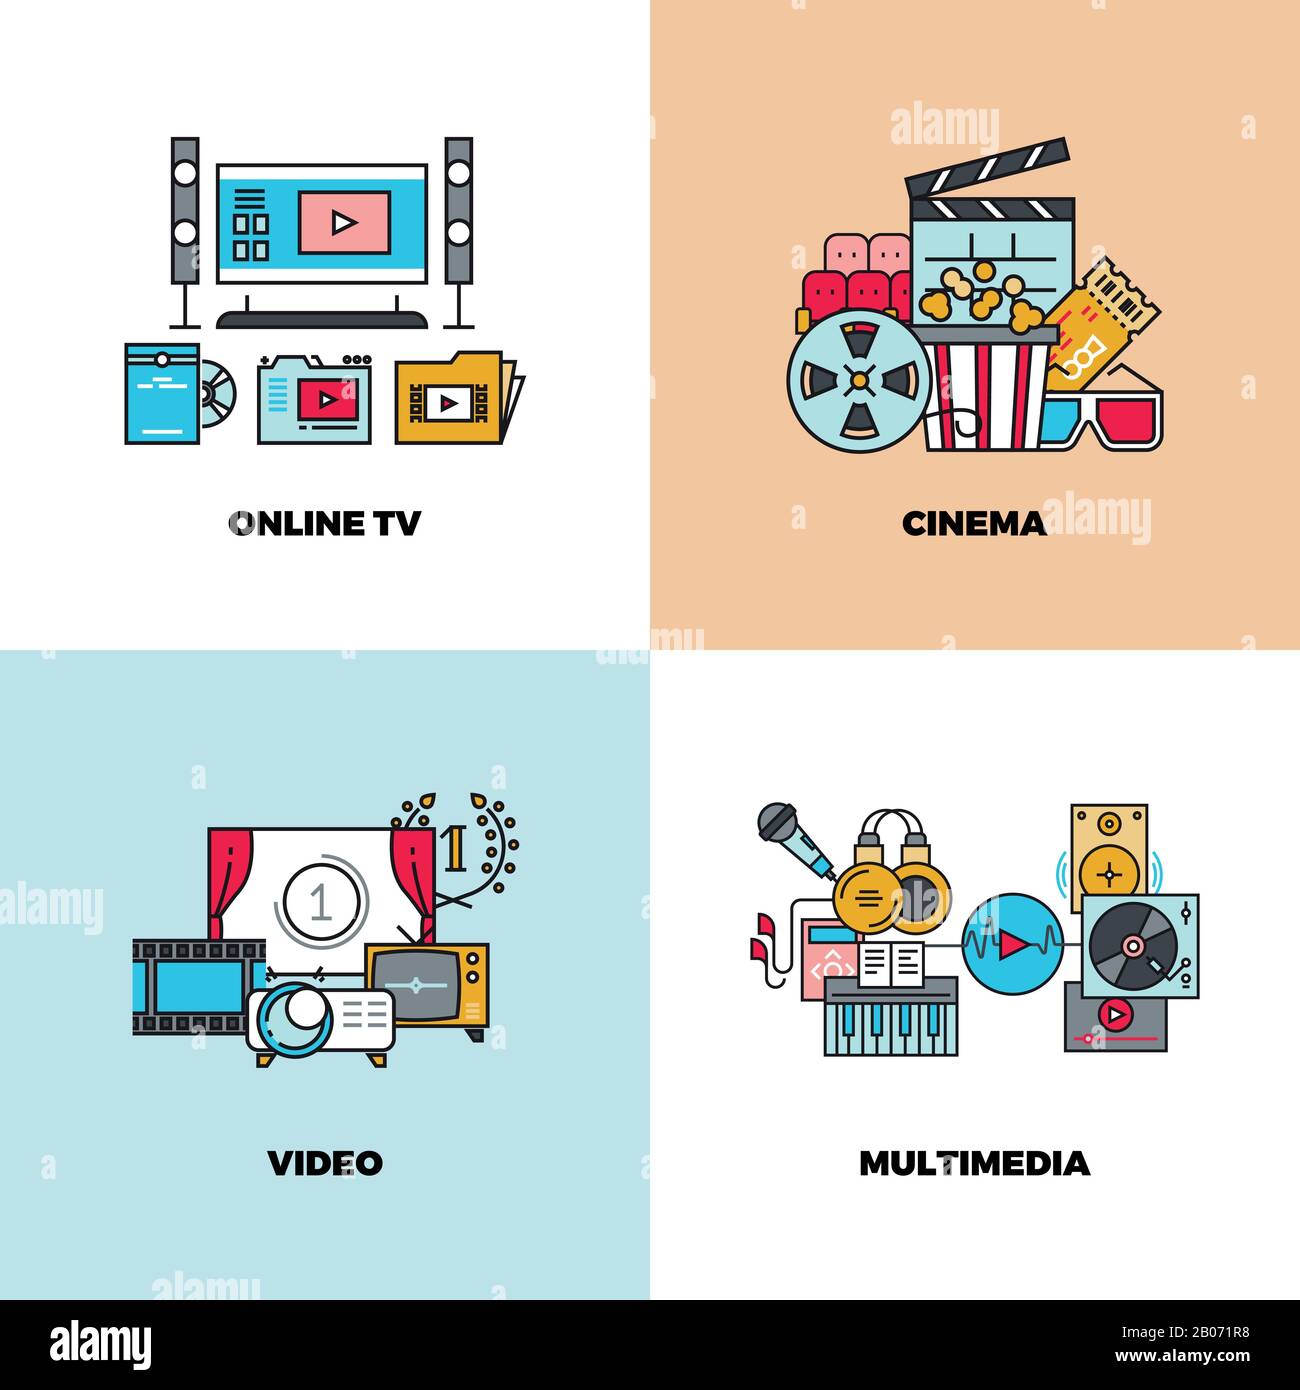 Entertainment, cinema, movie, video vector concept backgrounds. Online tv and multimedia illustration Stock Vector